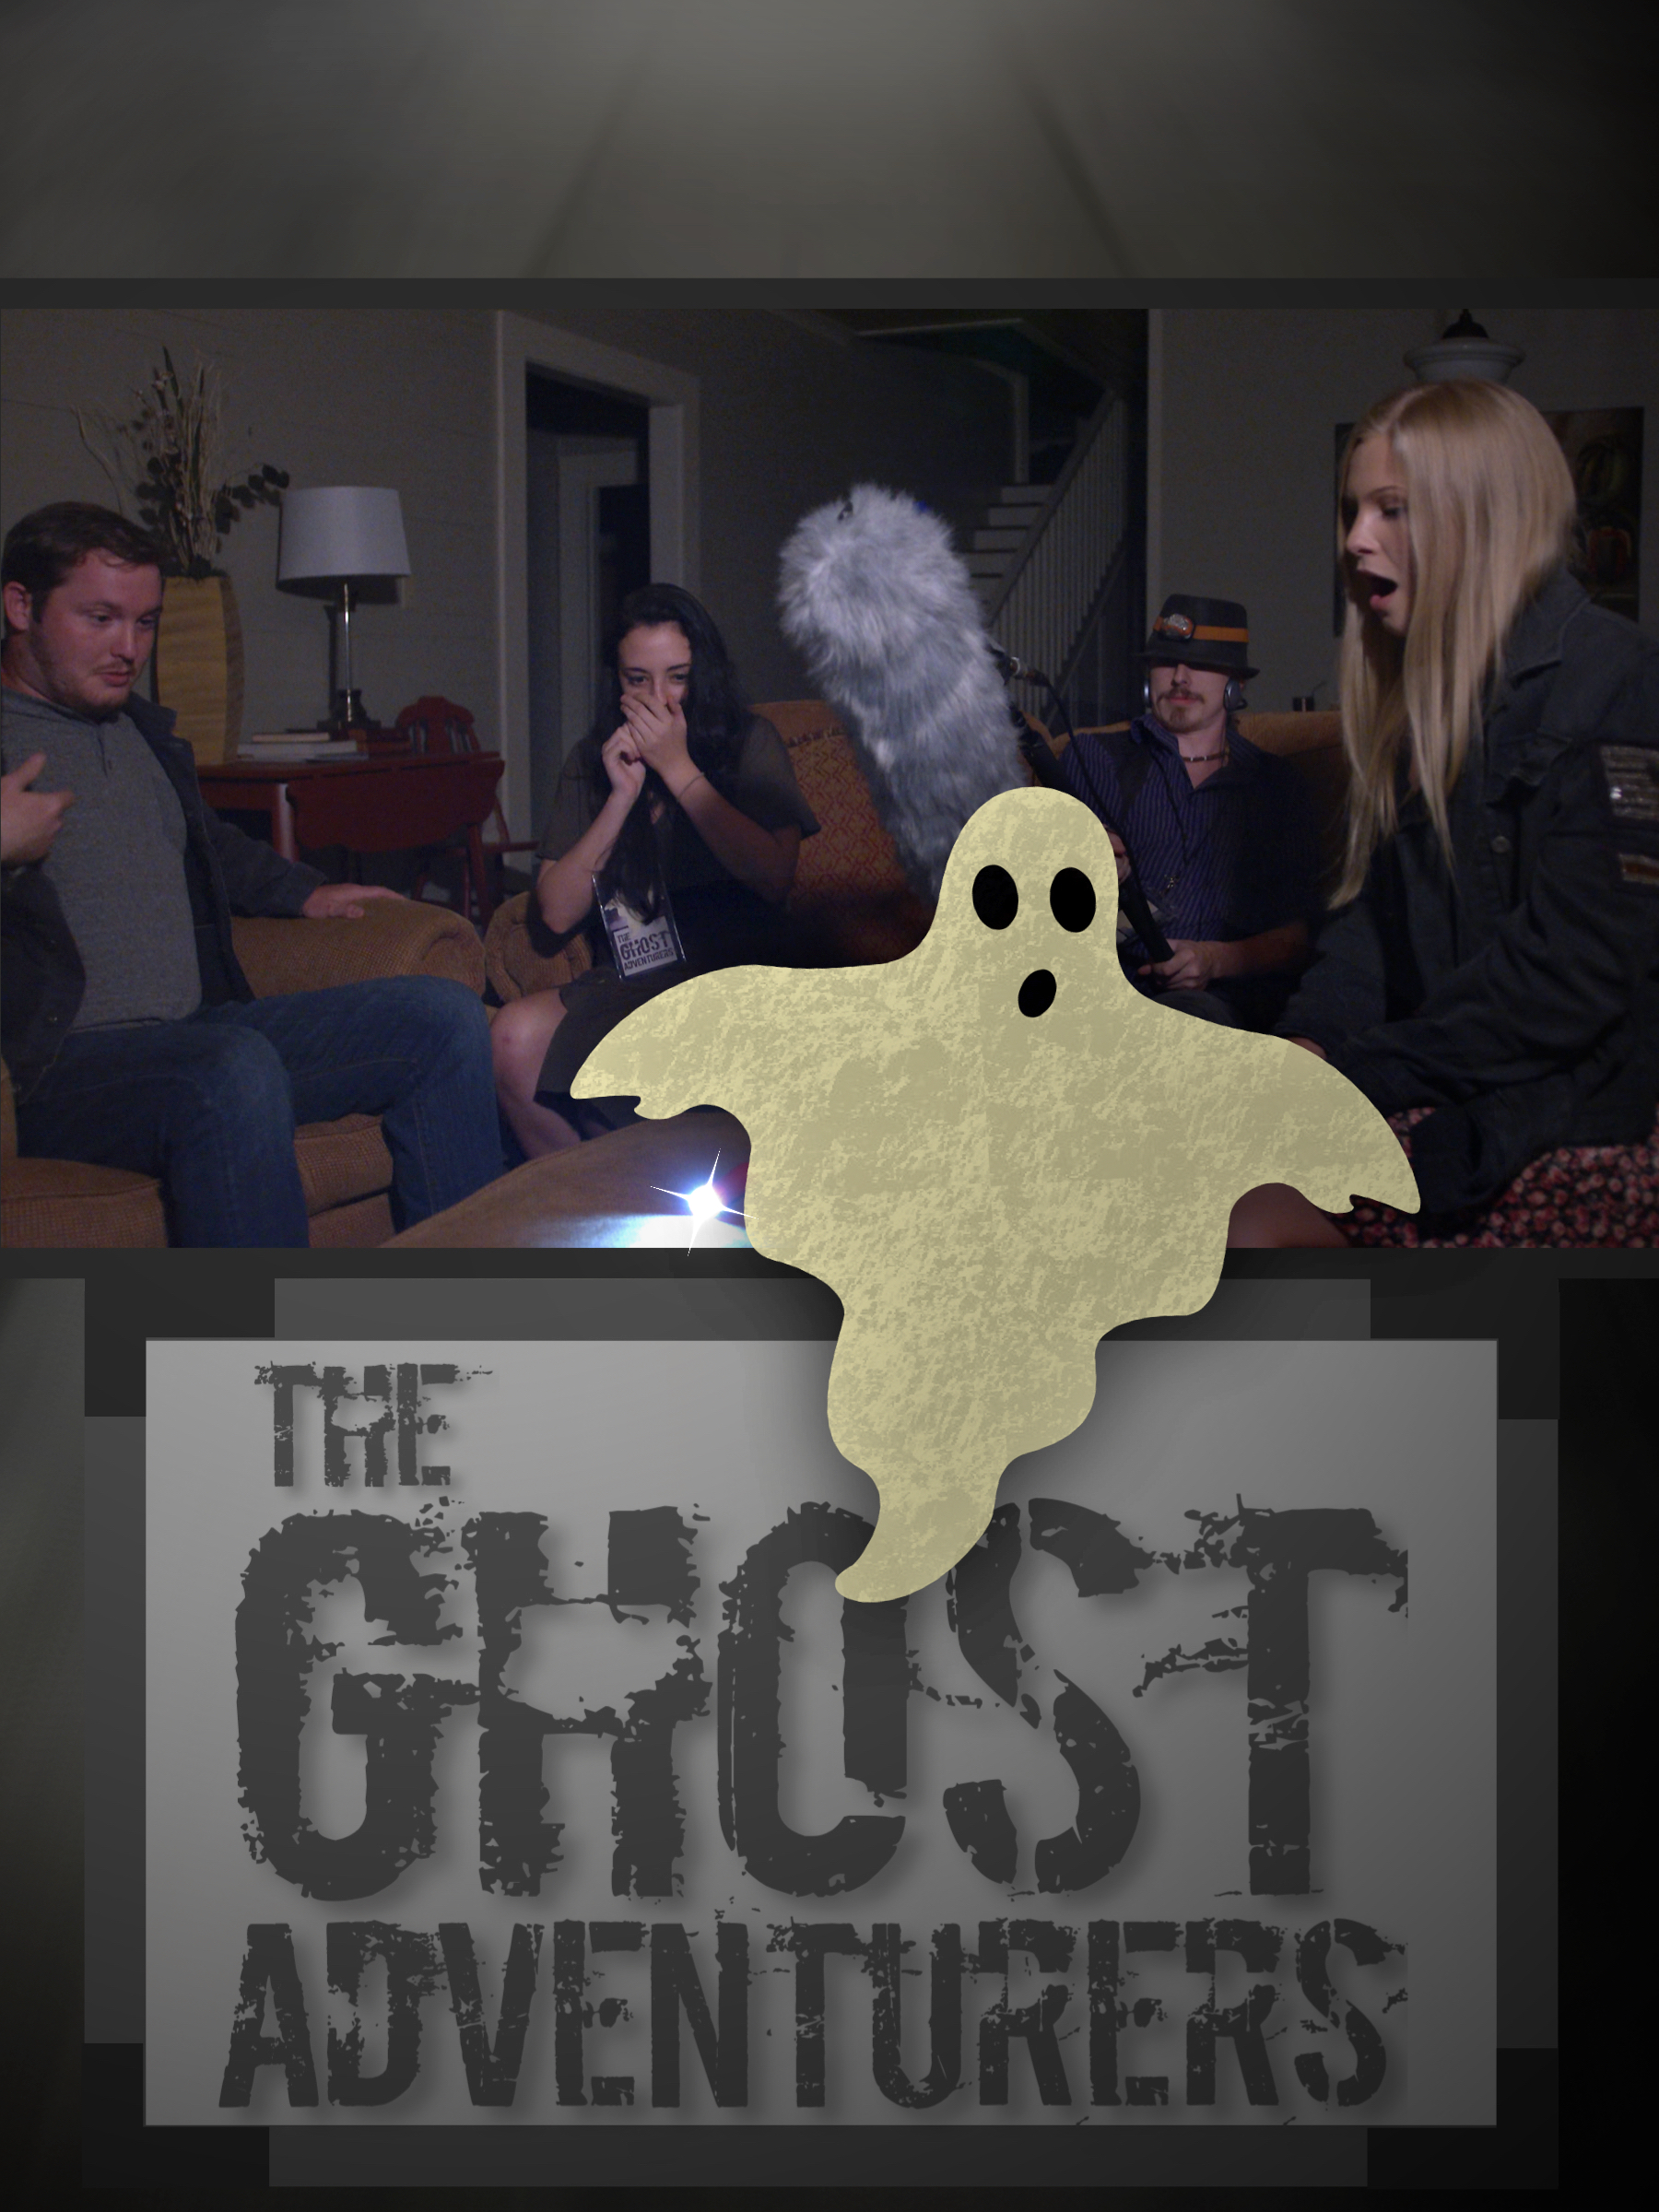 The Ghost Adventurers (2019)